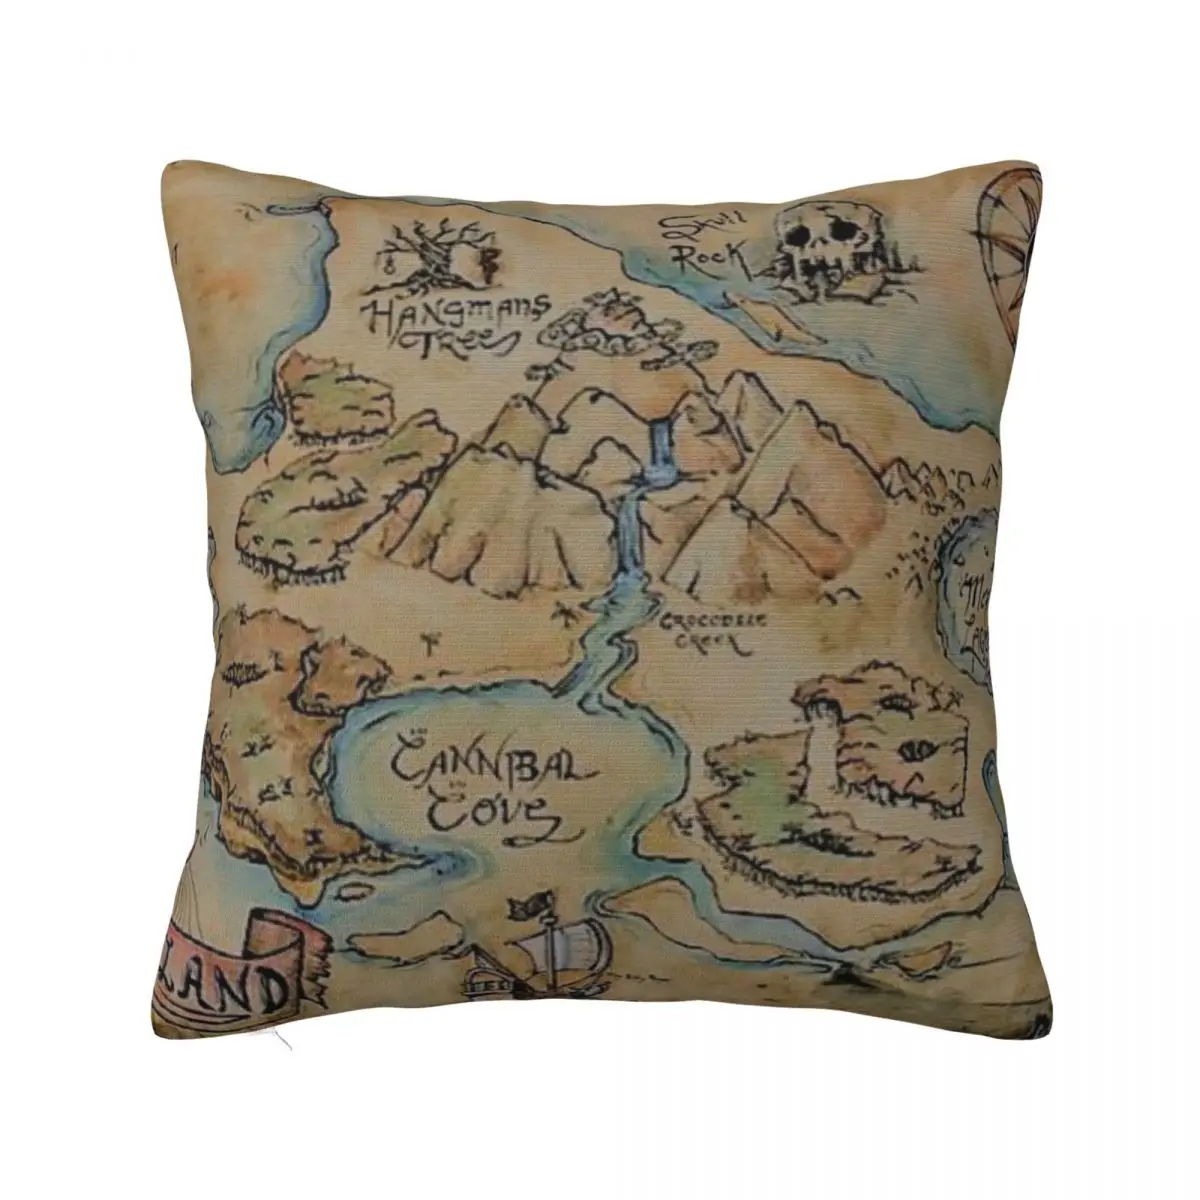 

Neverland map vintage Throw Pillow ornamental pillows Room decorating items Christmas Covers For Cushions